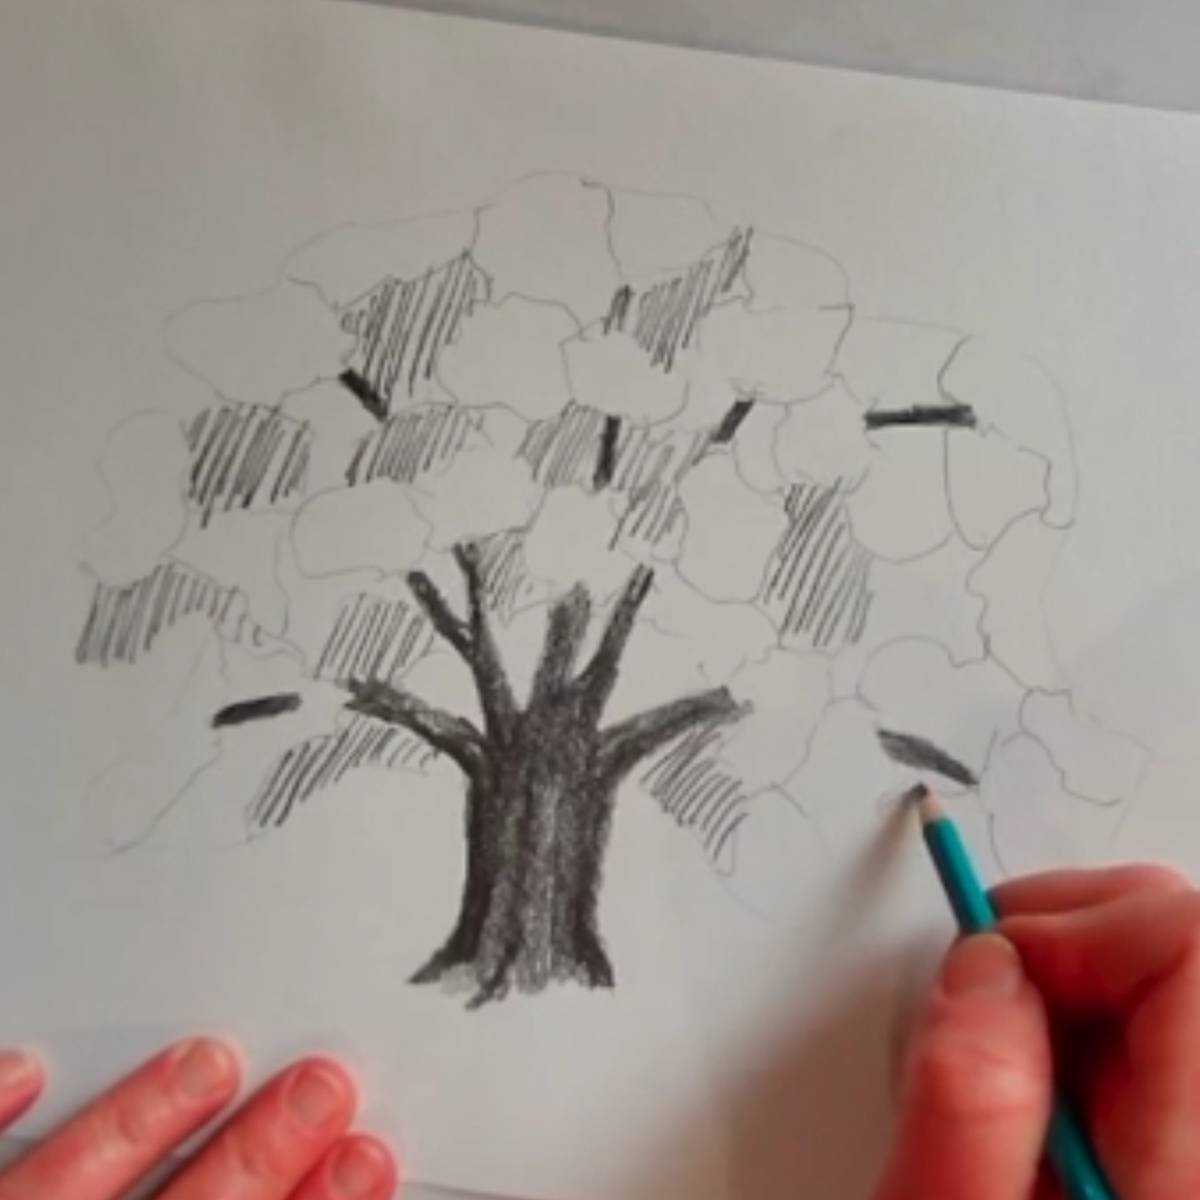 Sketch of a tree with hatching to begin shading with the artist's hands and pencil.